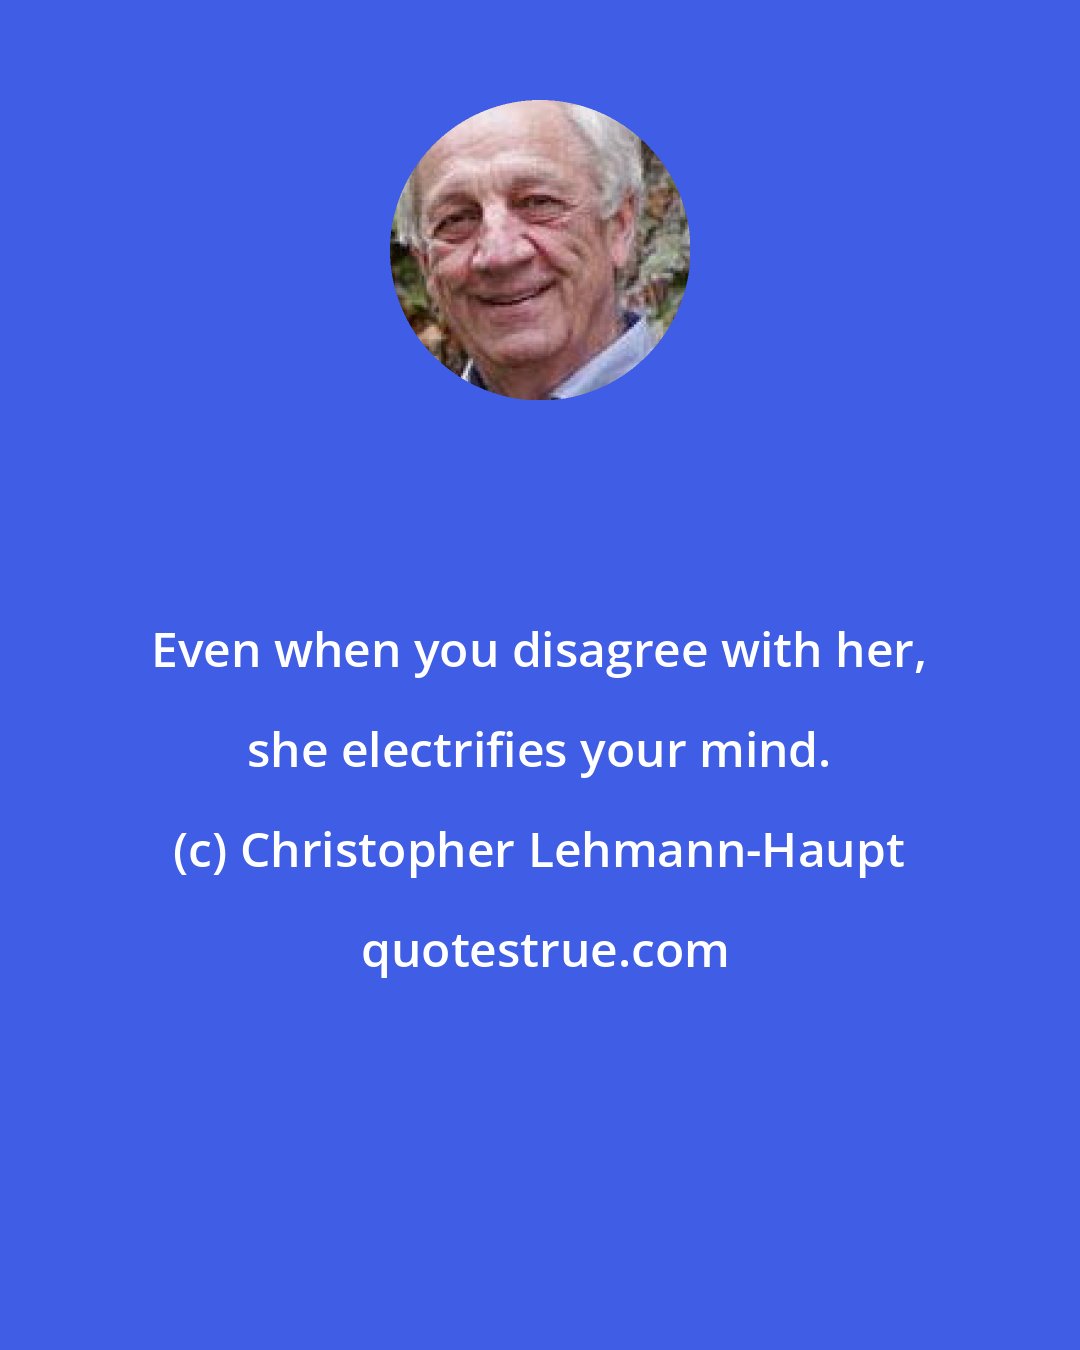 Christopher Lehmann-Haupt: Even when you disagree with her, she electrifies your mind.